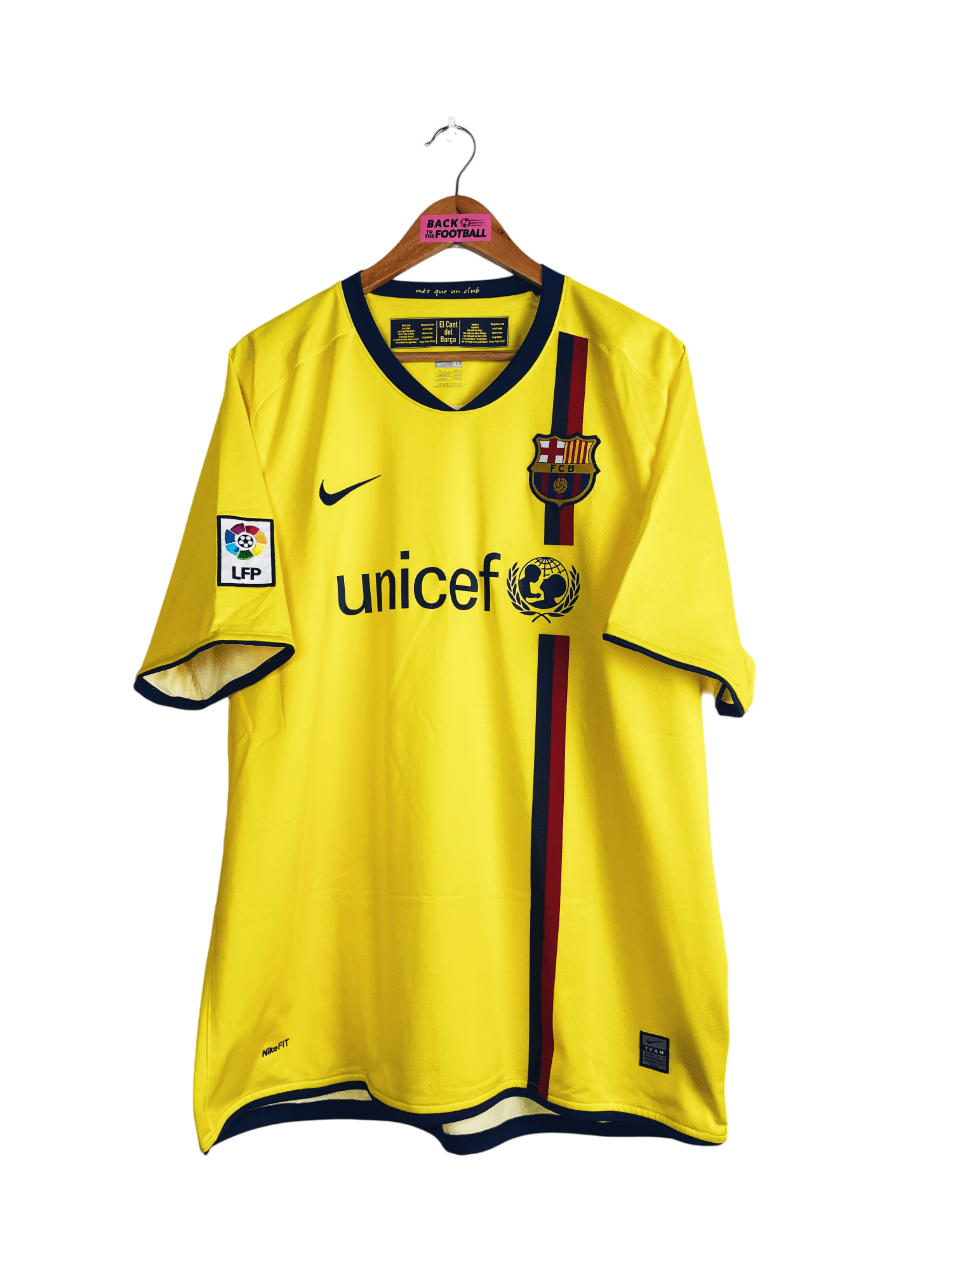 maillot barcelone 2008